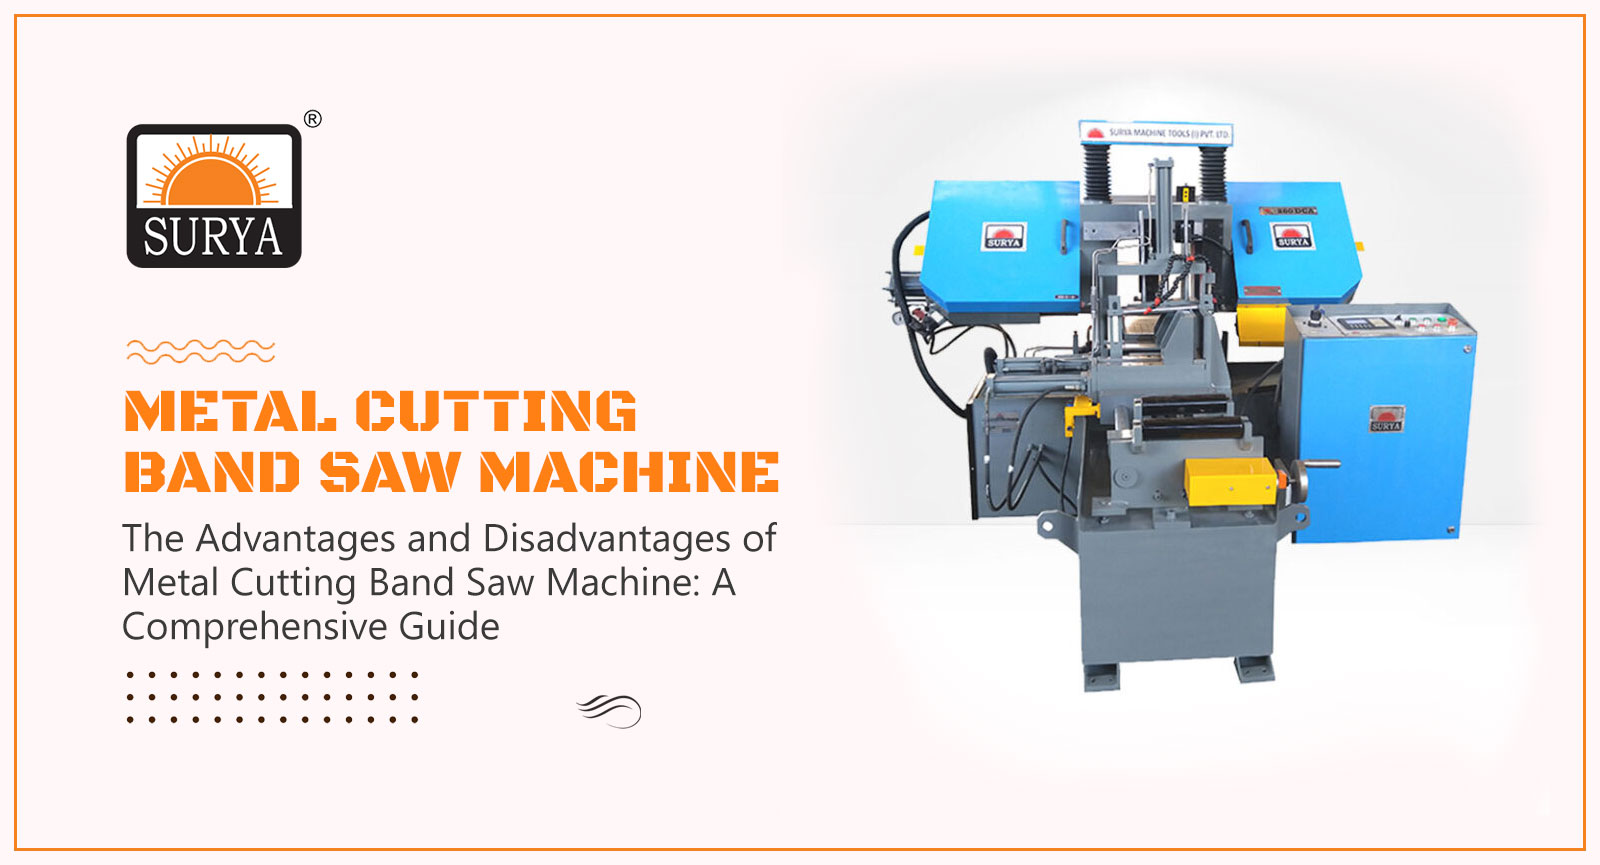 The Advantages and Disadvantages of Metal Cutting Band Saw Machine: A Comprehensive Guide